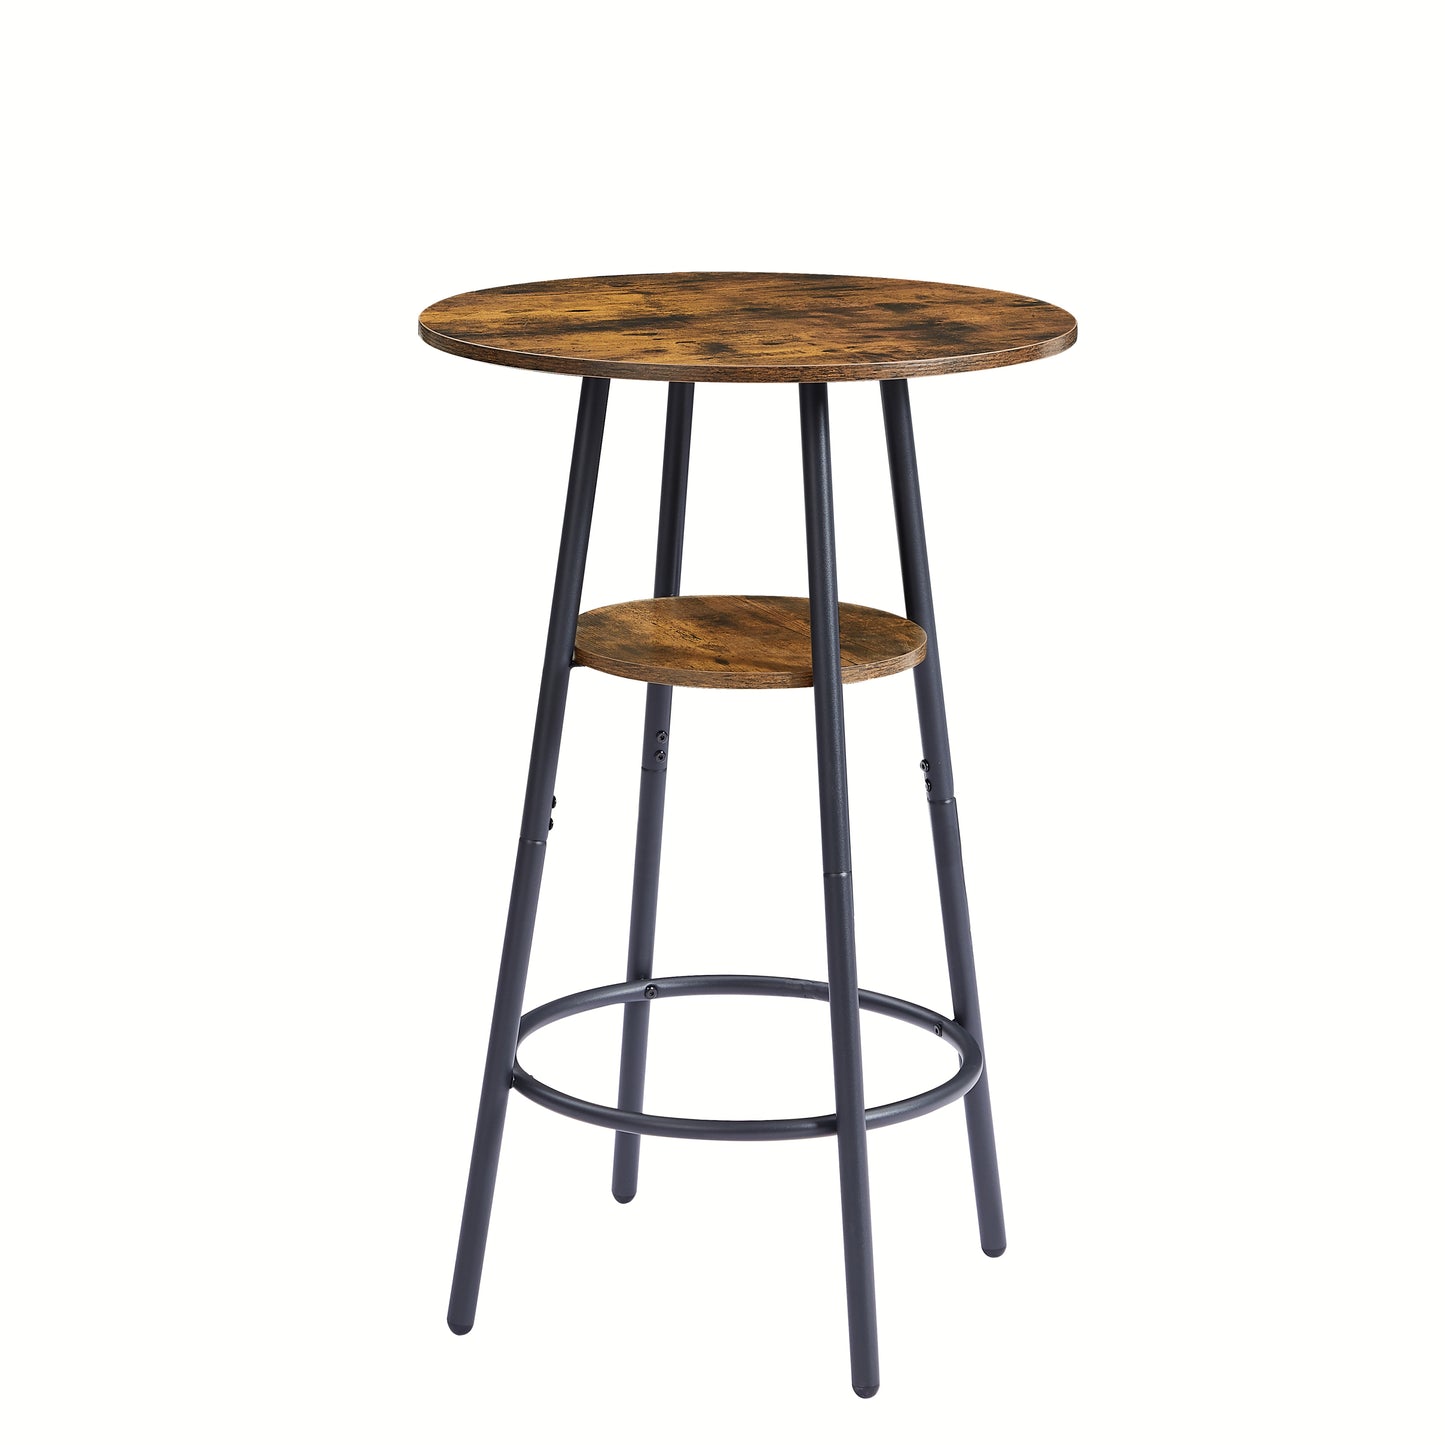 Round bar stool set with shelf, upholstered stool with backrest, Rustic Brown, 23.62'' W x 23.62'' D x 35.43'' H